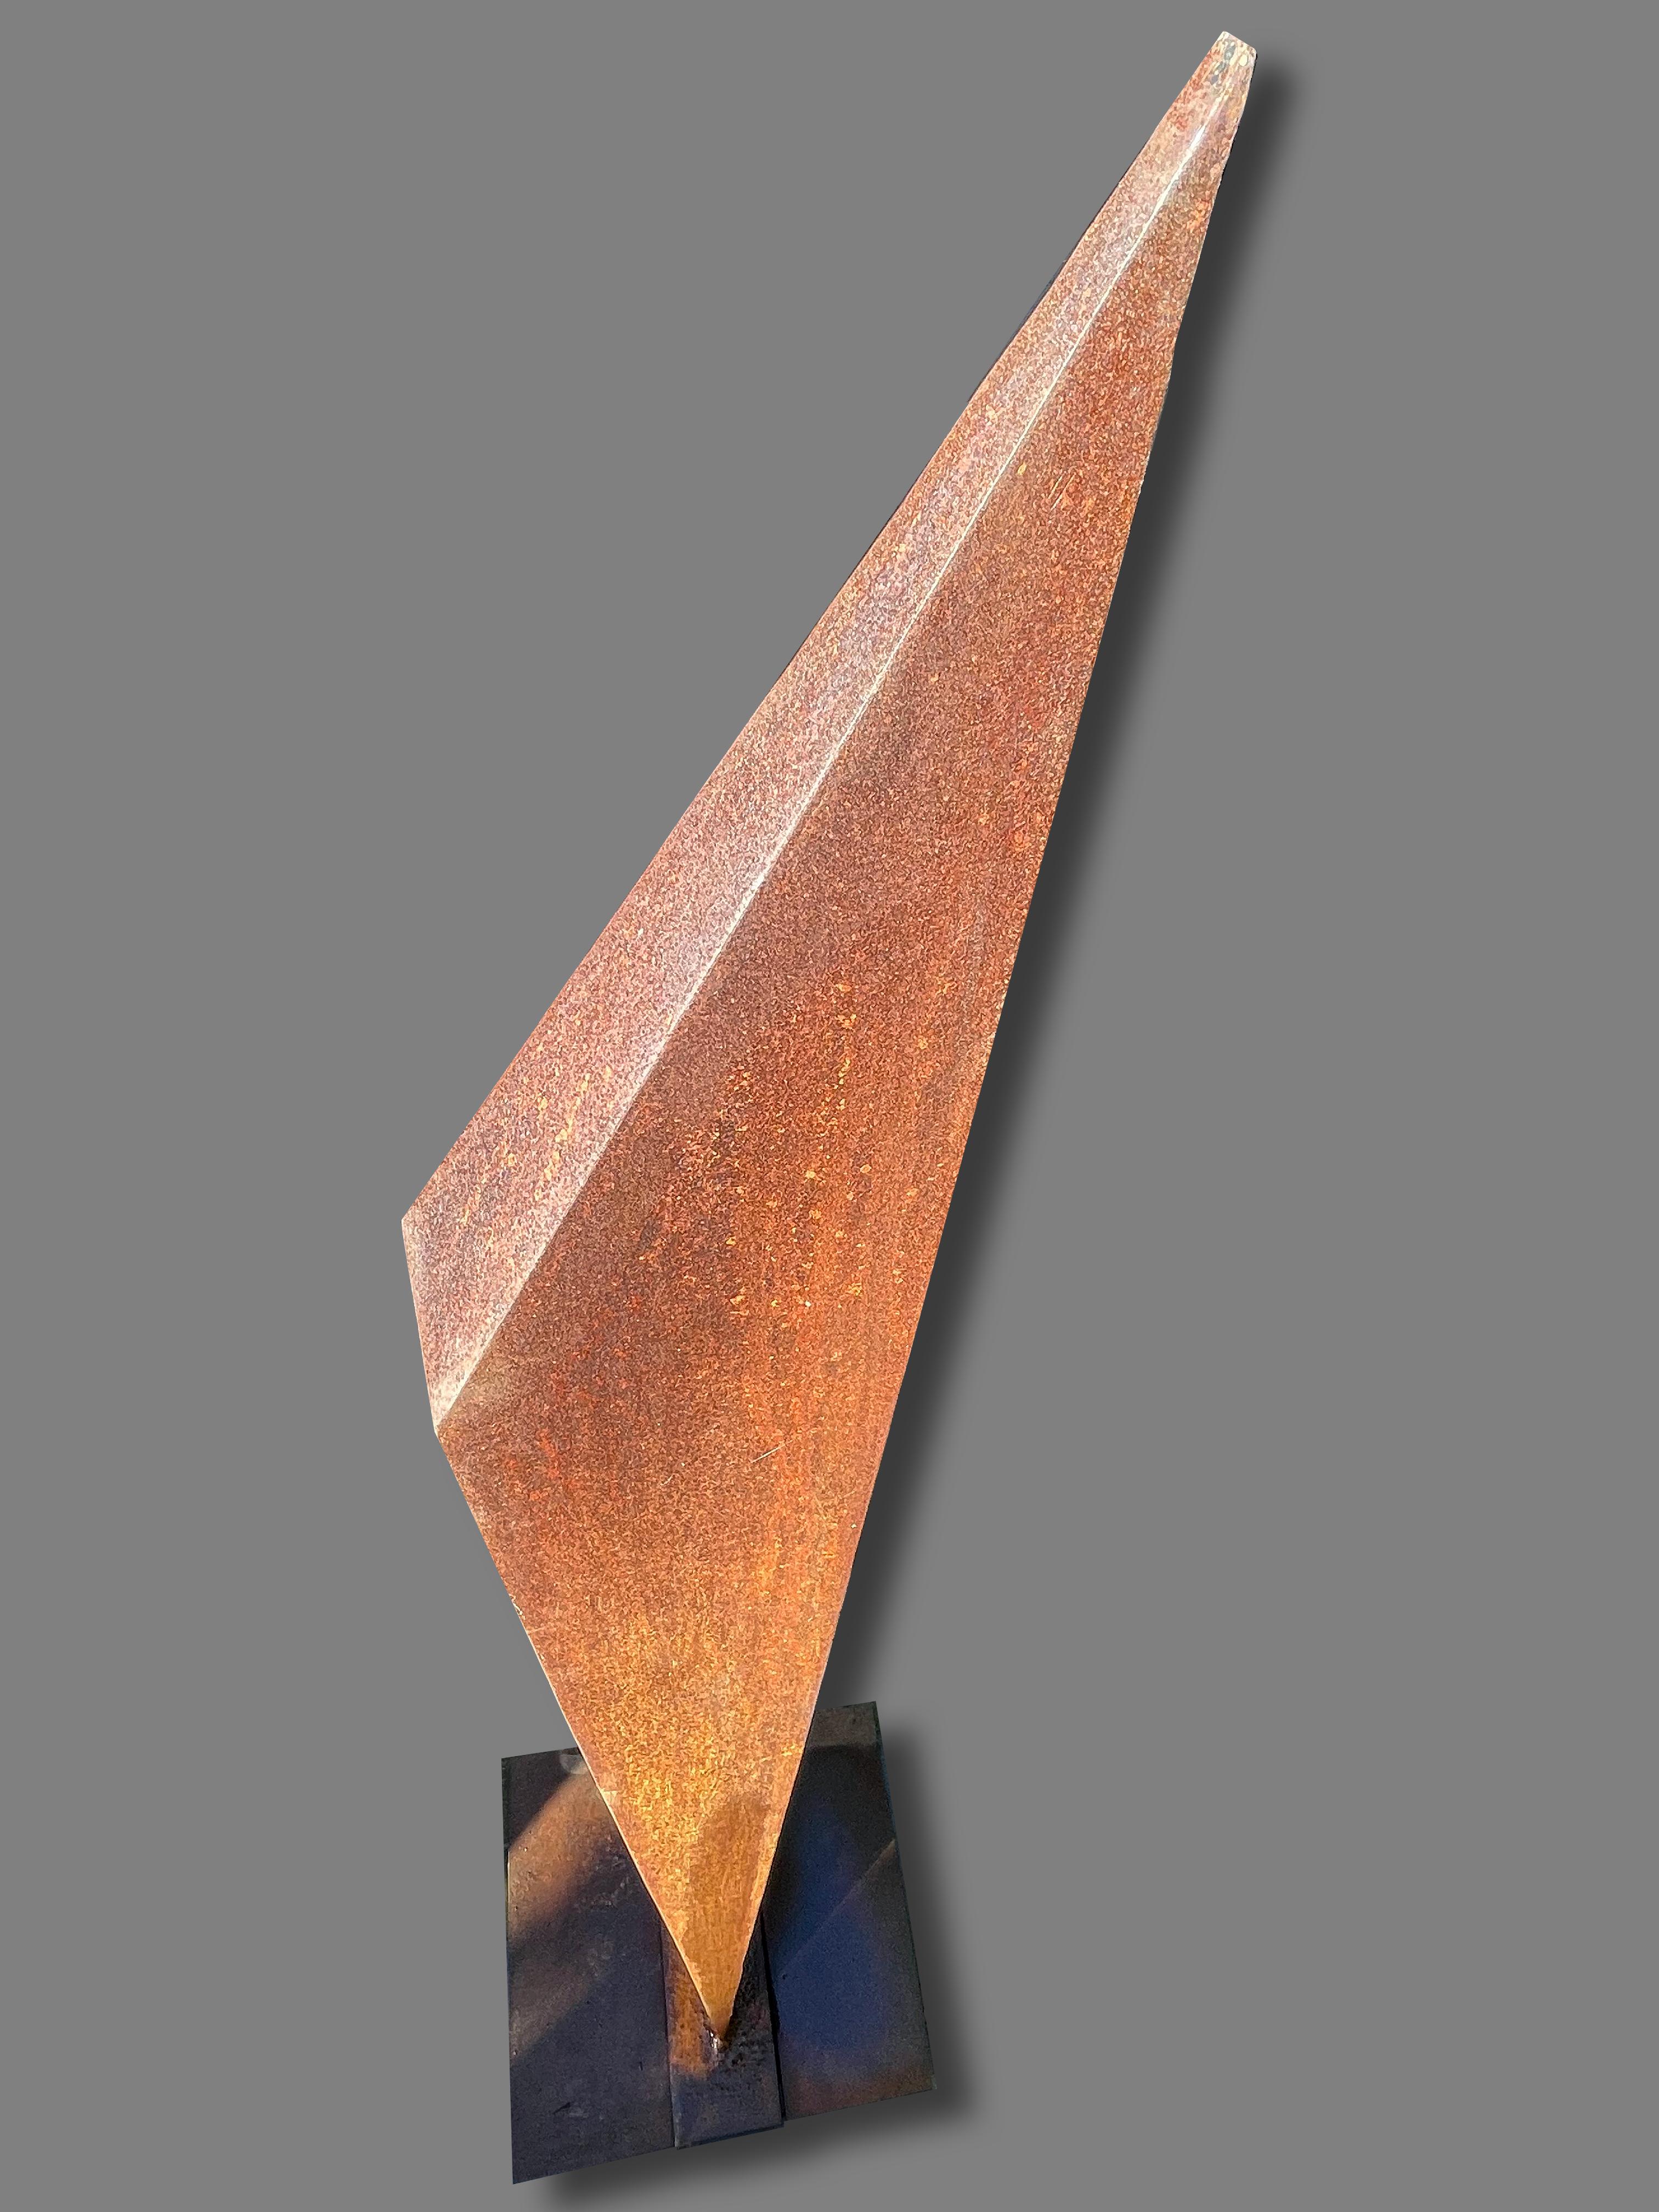 Golden Sentry - Gray Abstract Sculpture by Charles Sherman